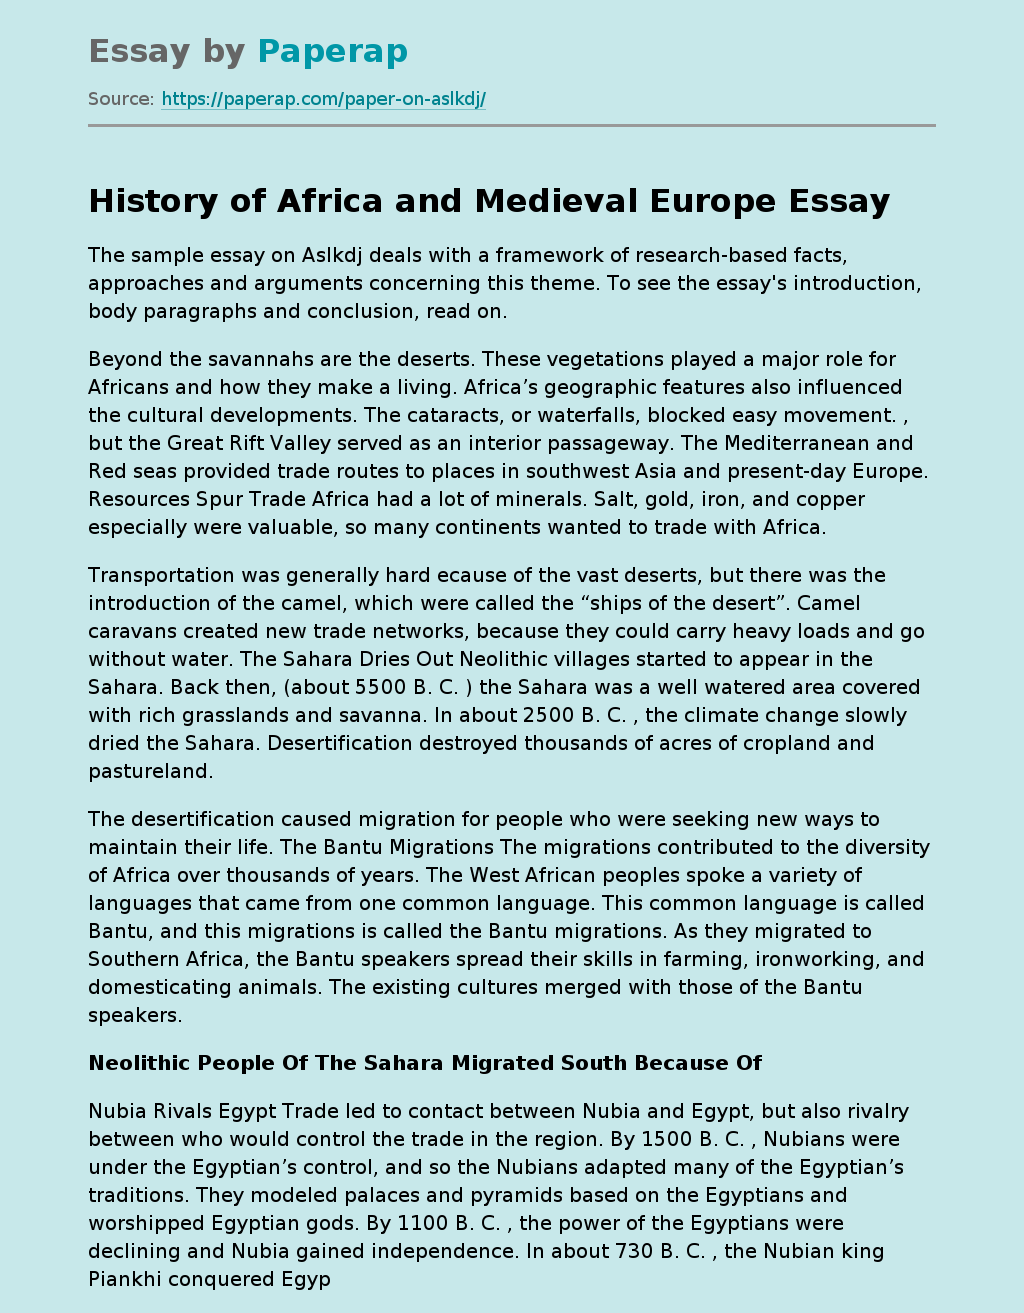 History of Africa and Medieval Europe